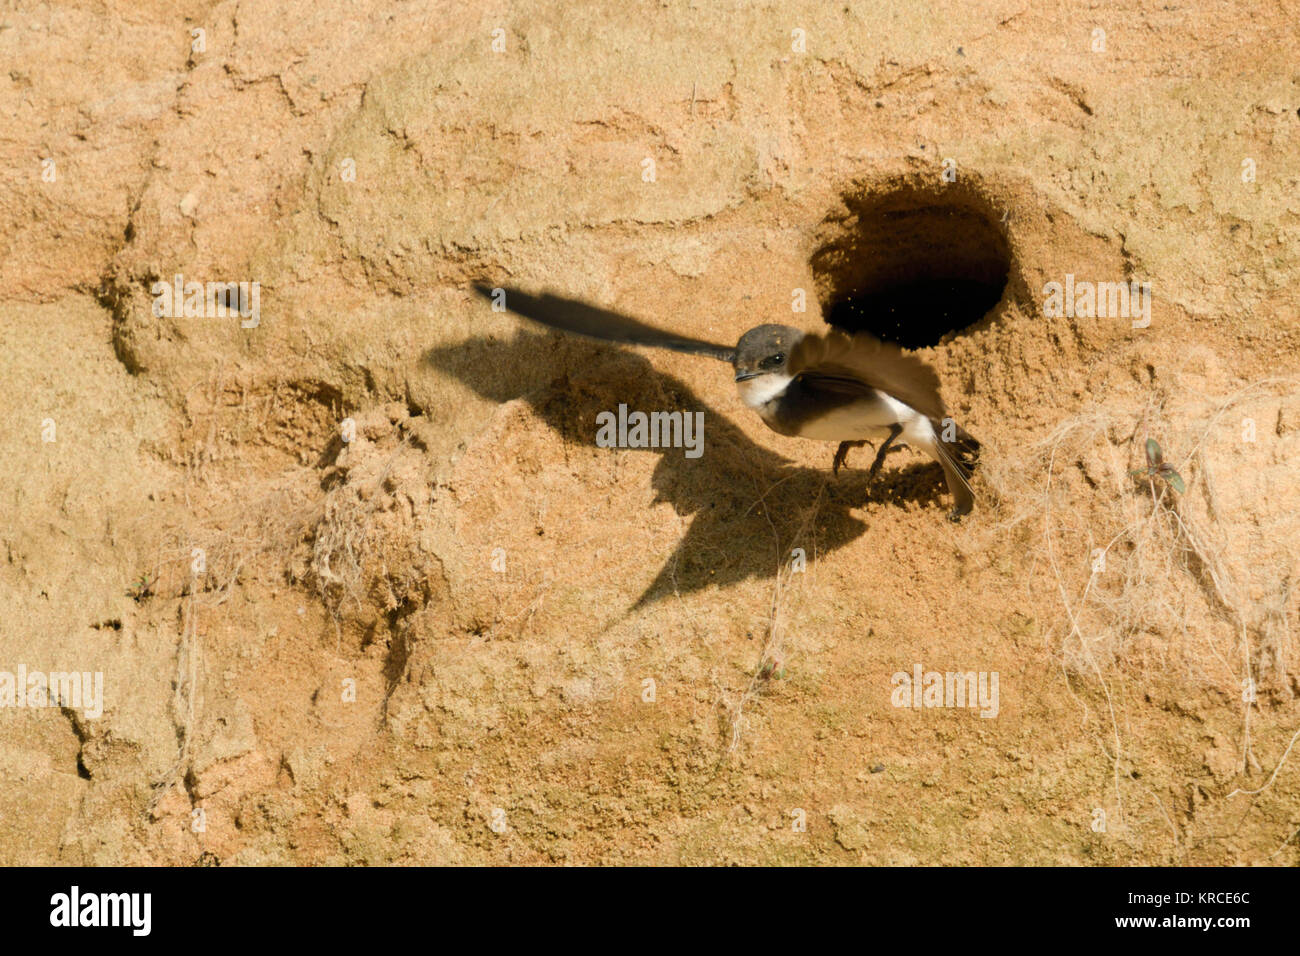 Sand Martin / Bank Swallow / Uferschwalbe ( Riparia riparia ) in flight, taking off from its nest hole in a sandy river bank, wildlife, Europe. Stock Photo